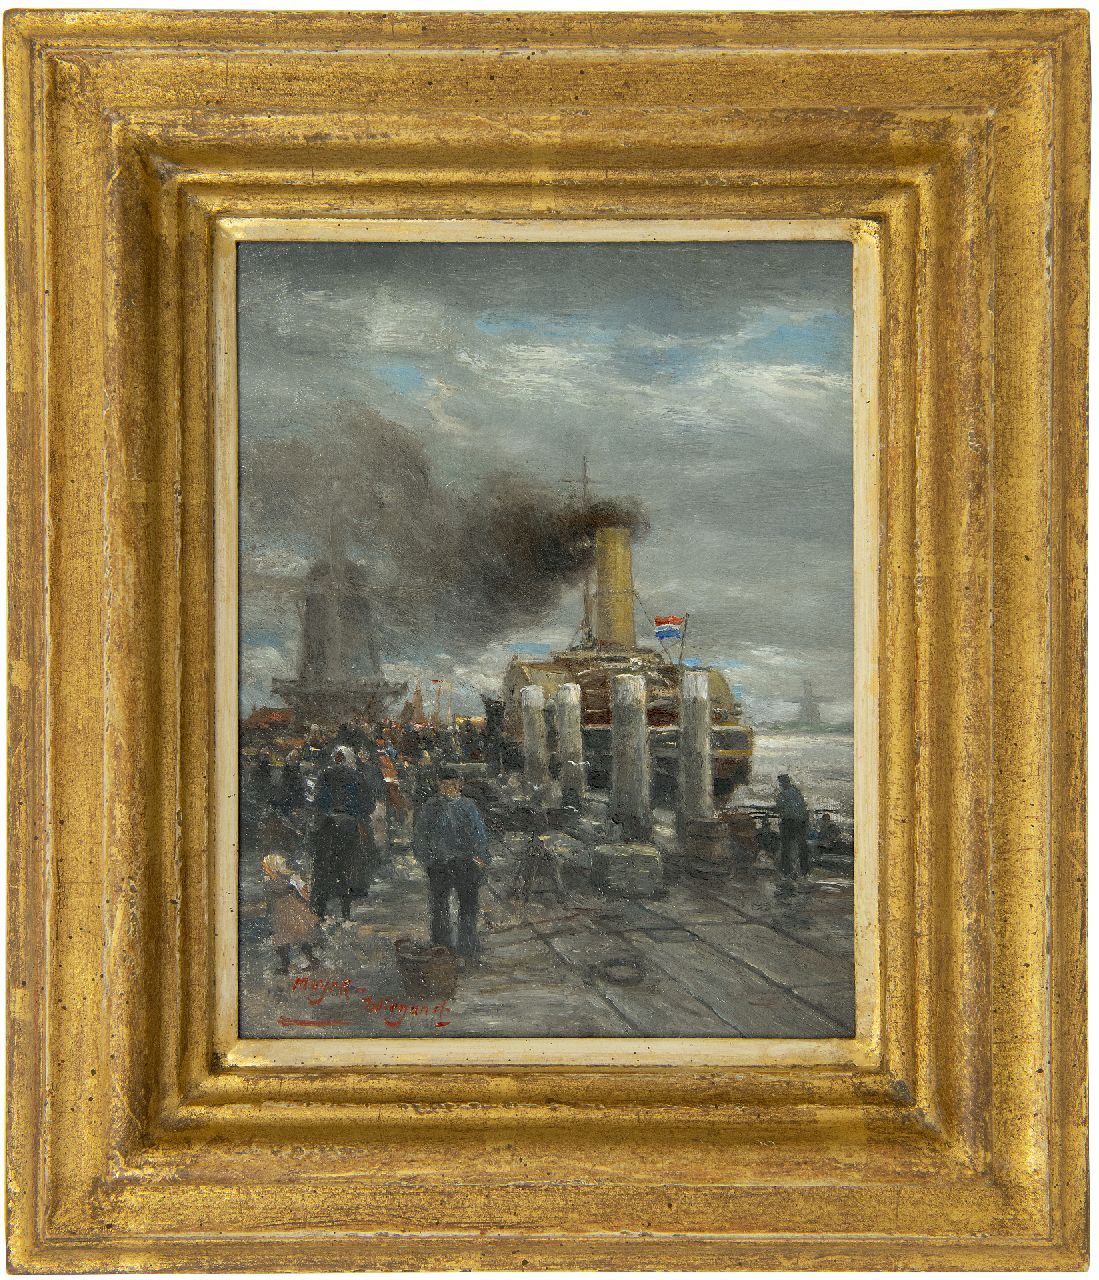 Meyer-Wiegand R.D.  | Rolf Dieter Meyer-Wiegand | Paintings offered for sale | Steam ferry at the quay, oil on panel 17.9 x 13.9 cm, signed l.l.